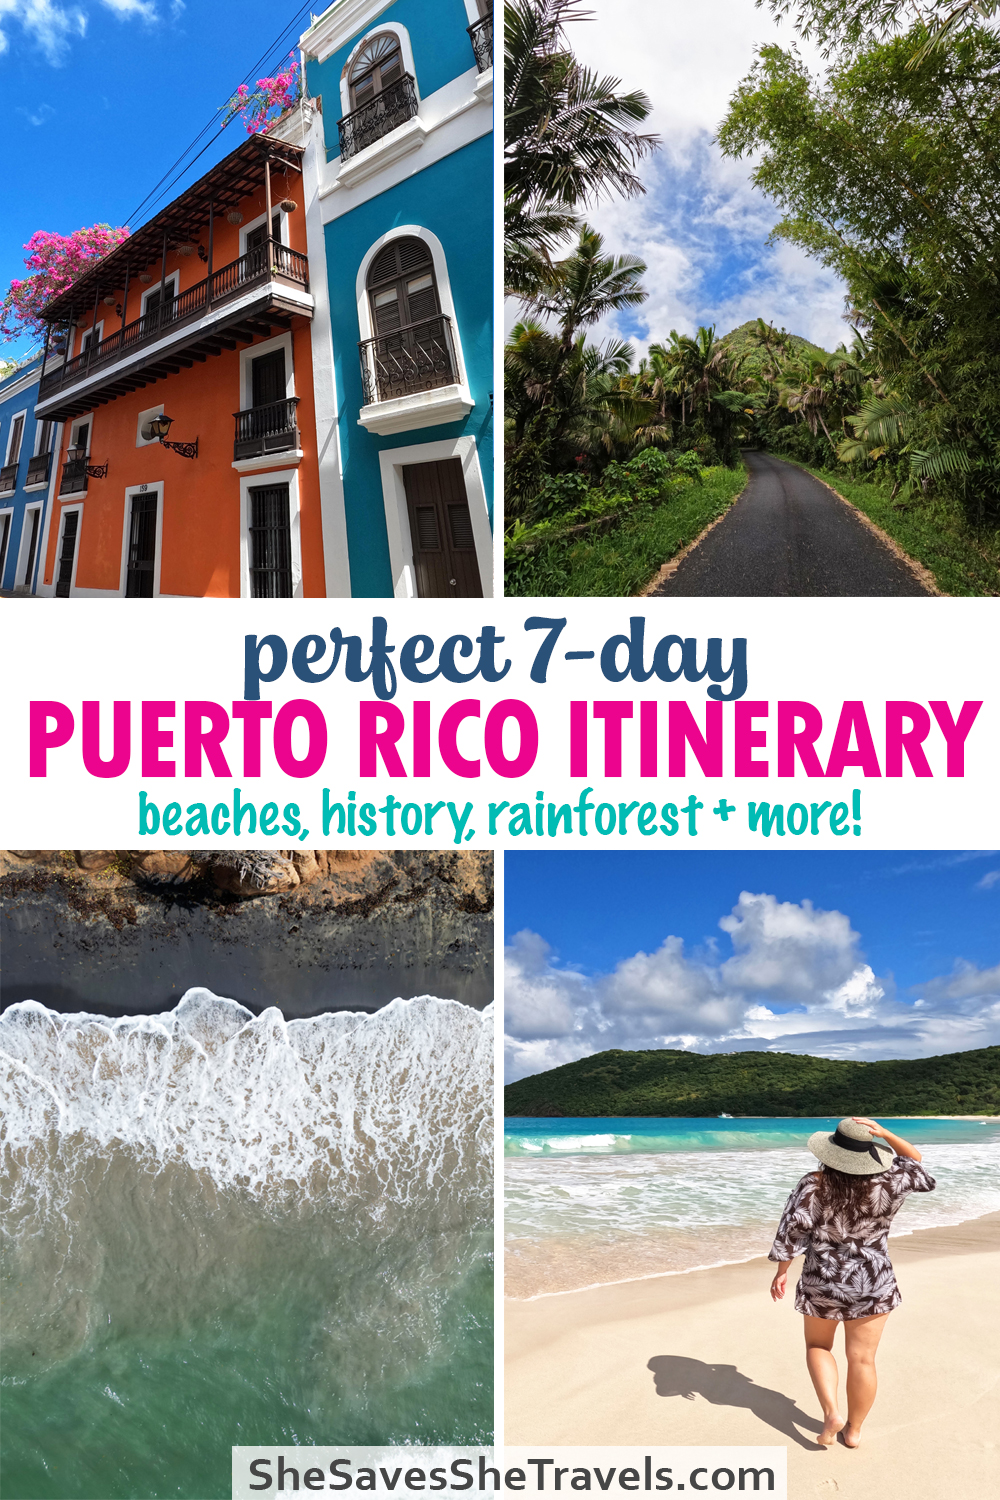 text that reads perfect 7 day Puerto Rico itinerary beaches history rainforest + more with photos of buildings, road through forest, black sand beach and woman on beach